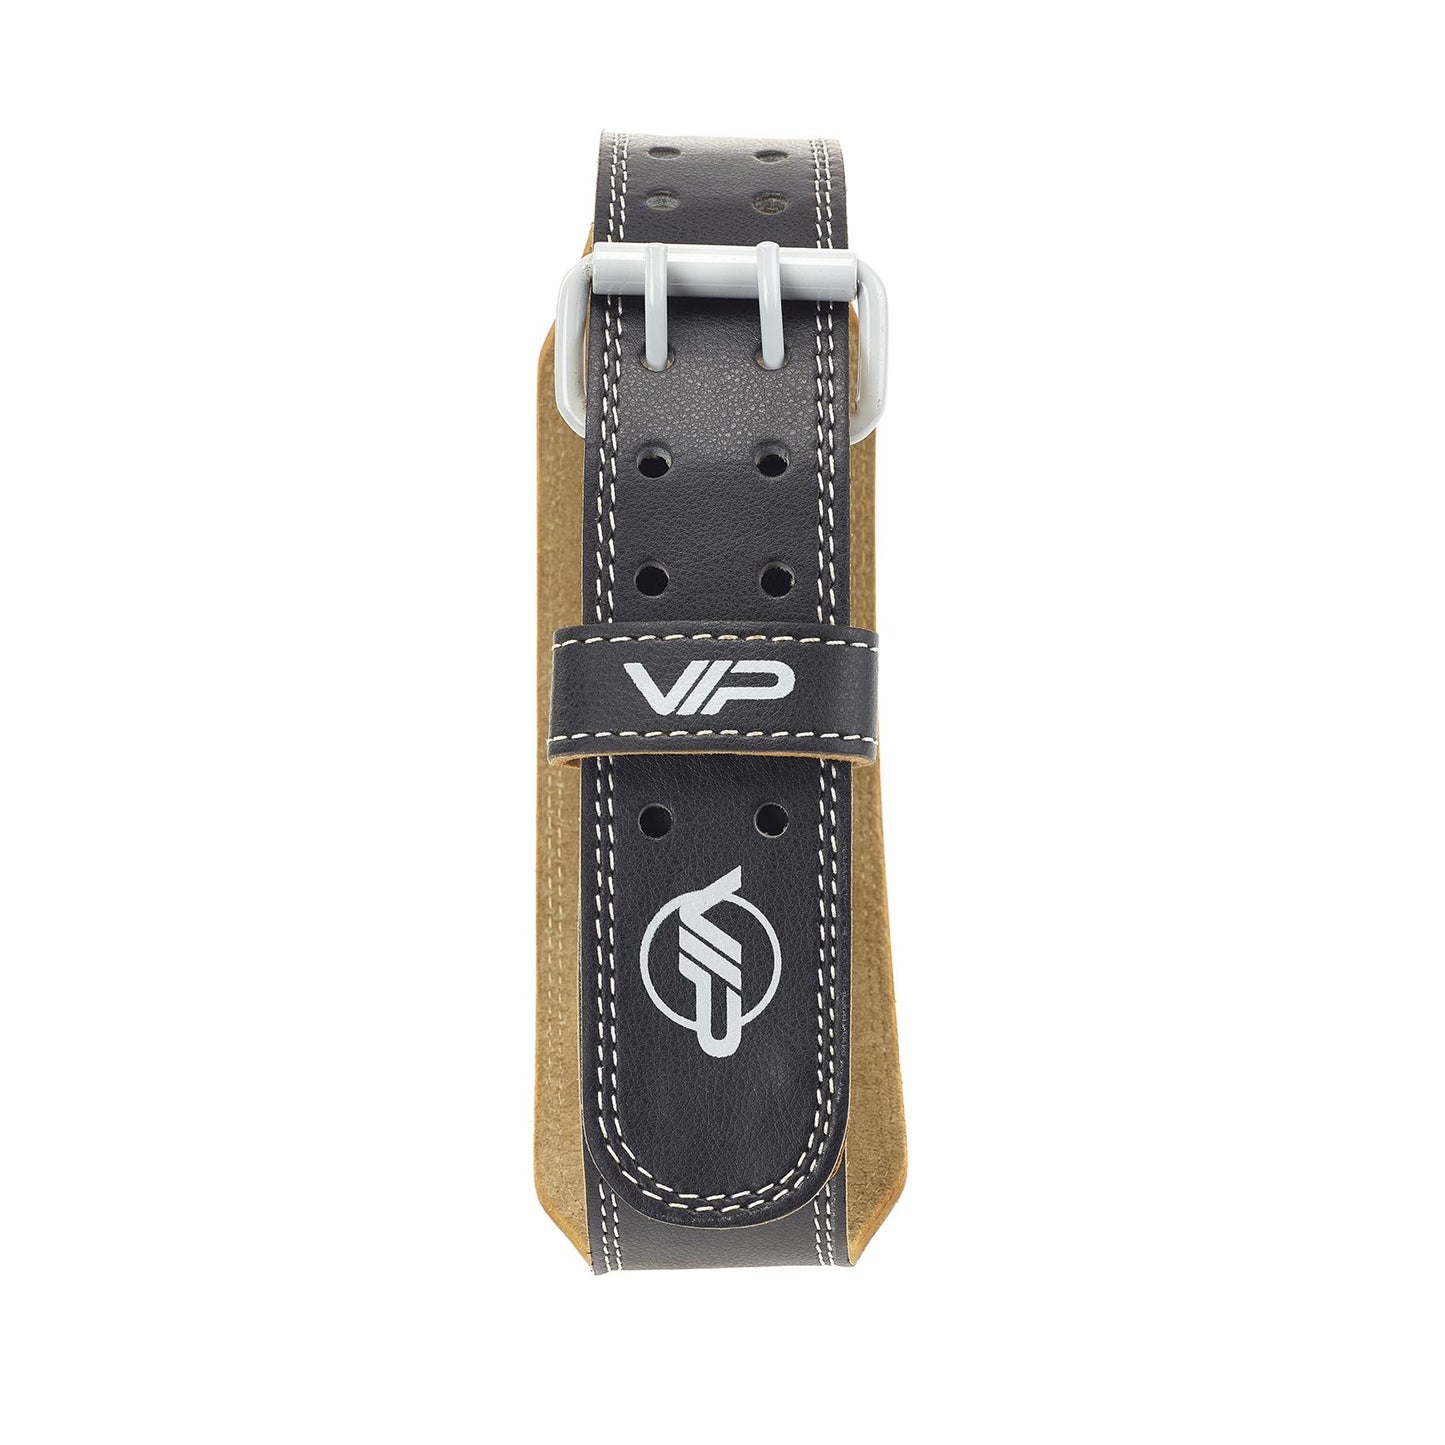 VIP Fitness Auxilium Leather Padded Weight lifting Belt 4" Width